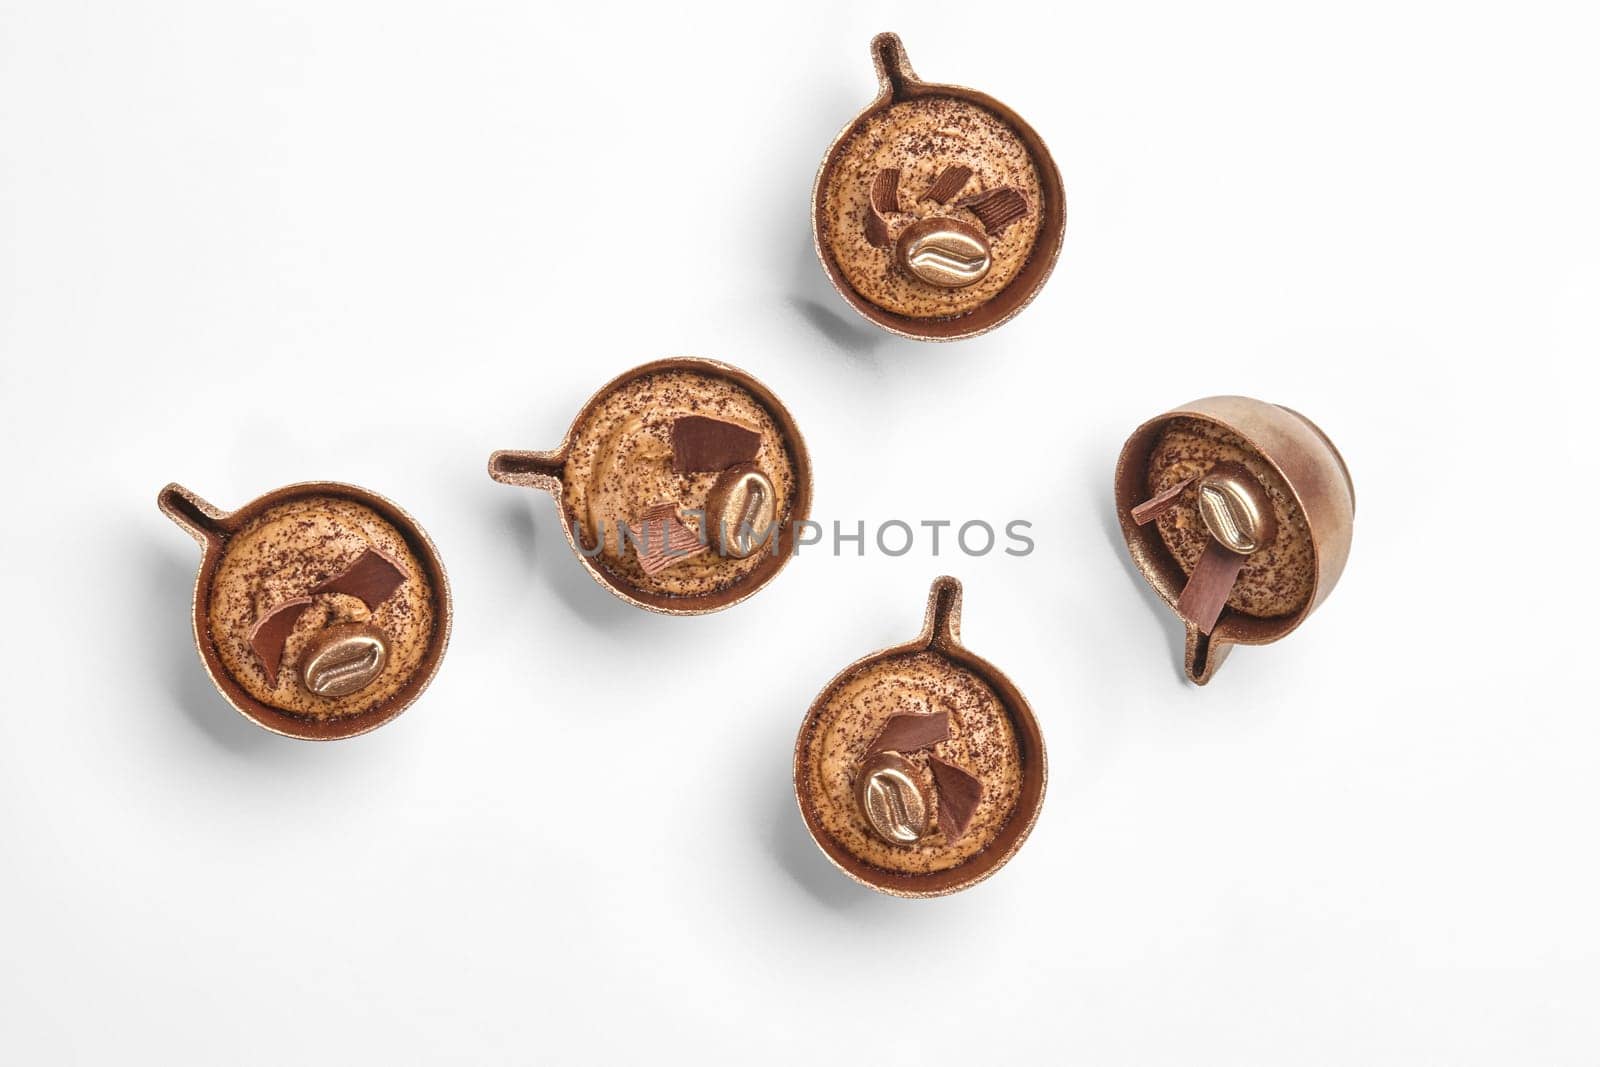 Elegant chocolate candies with coffee filling, crafted to resemble miniature coffee cups, on white background